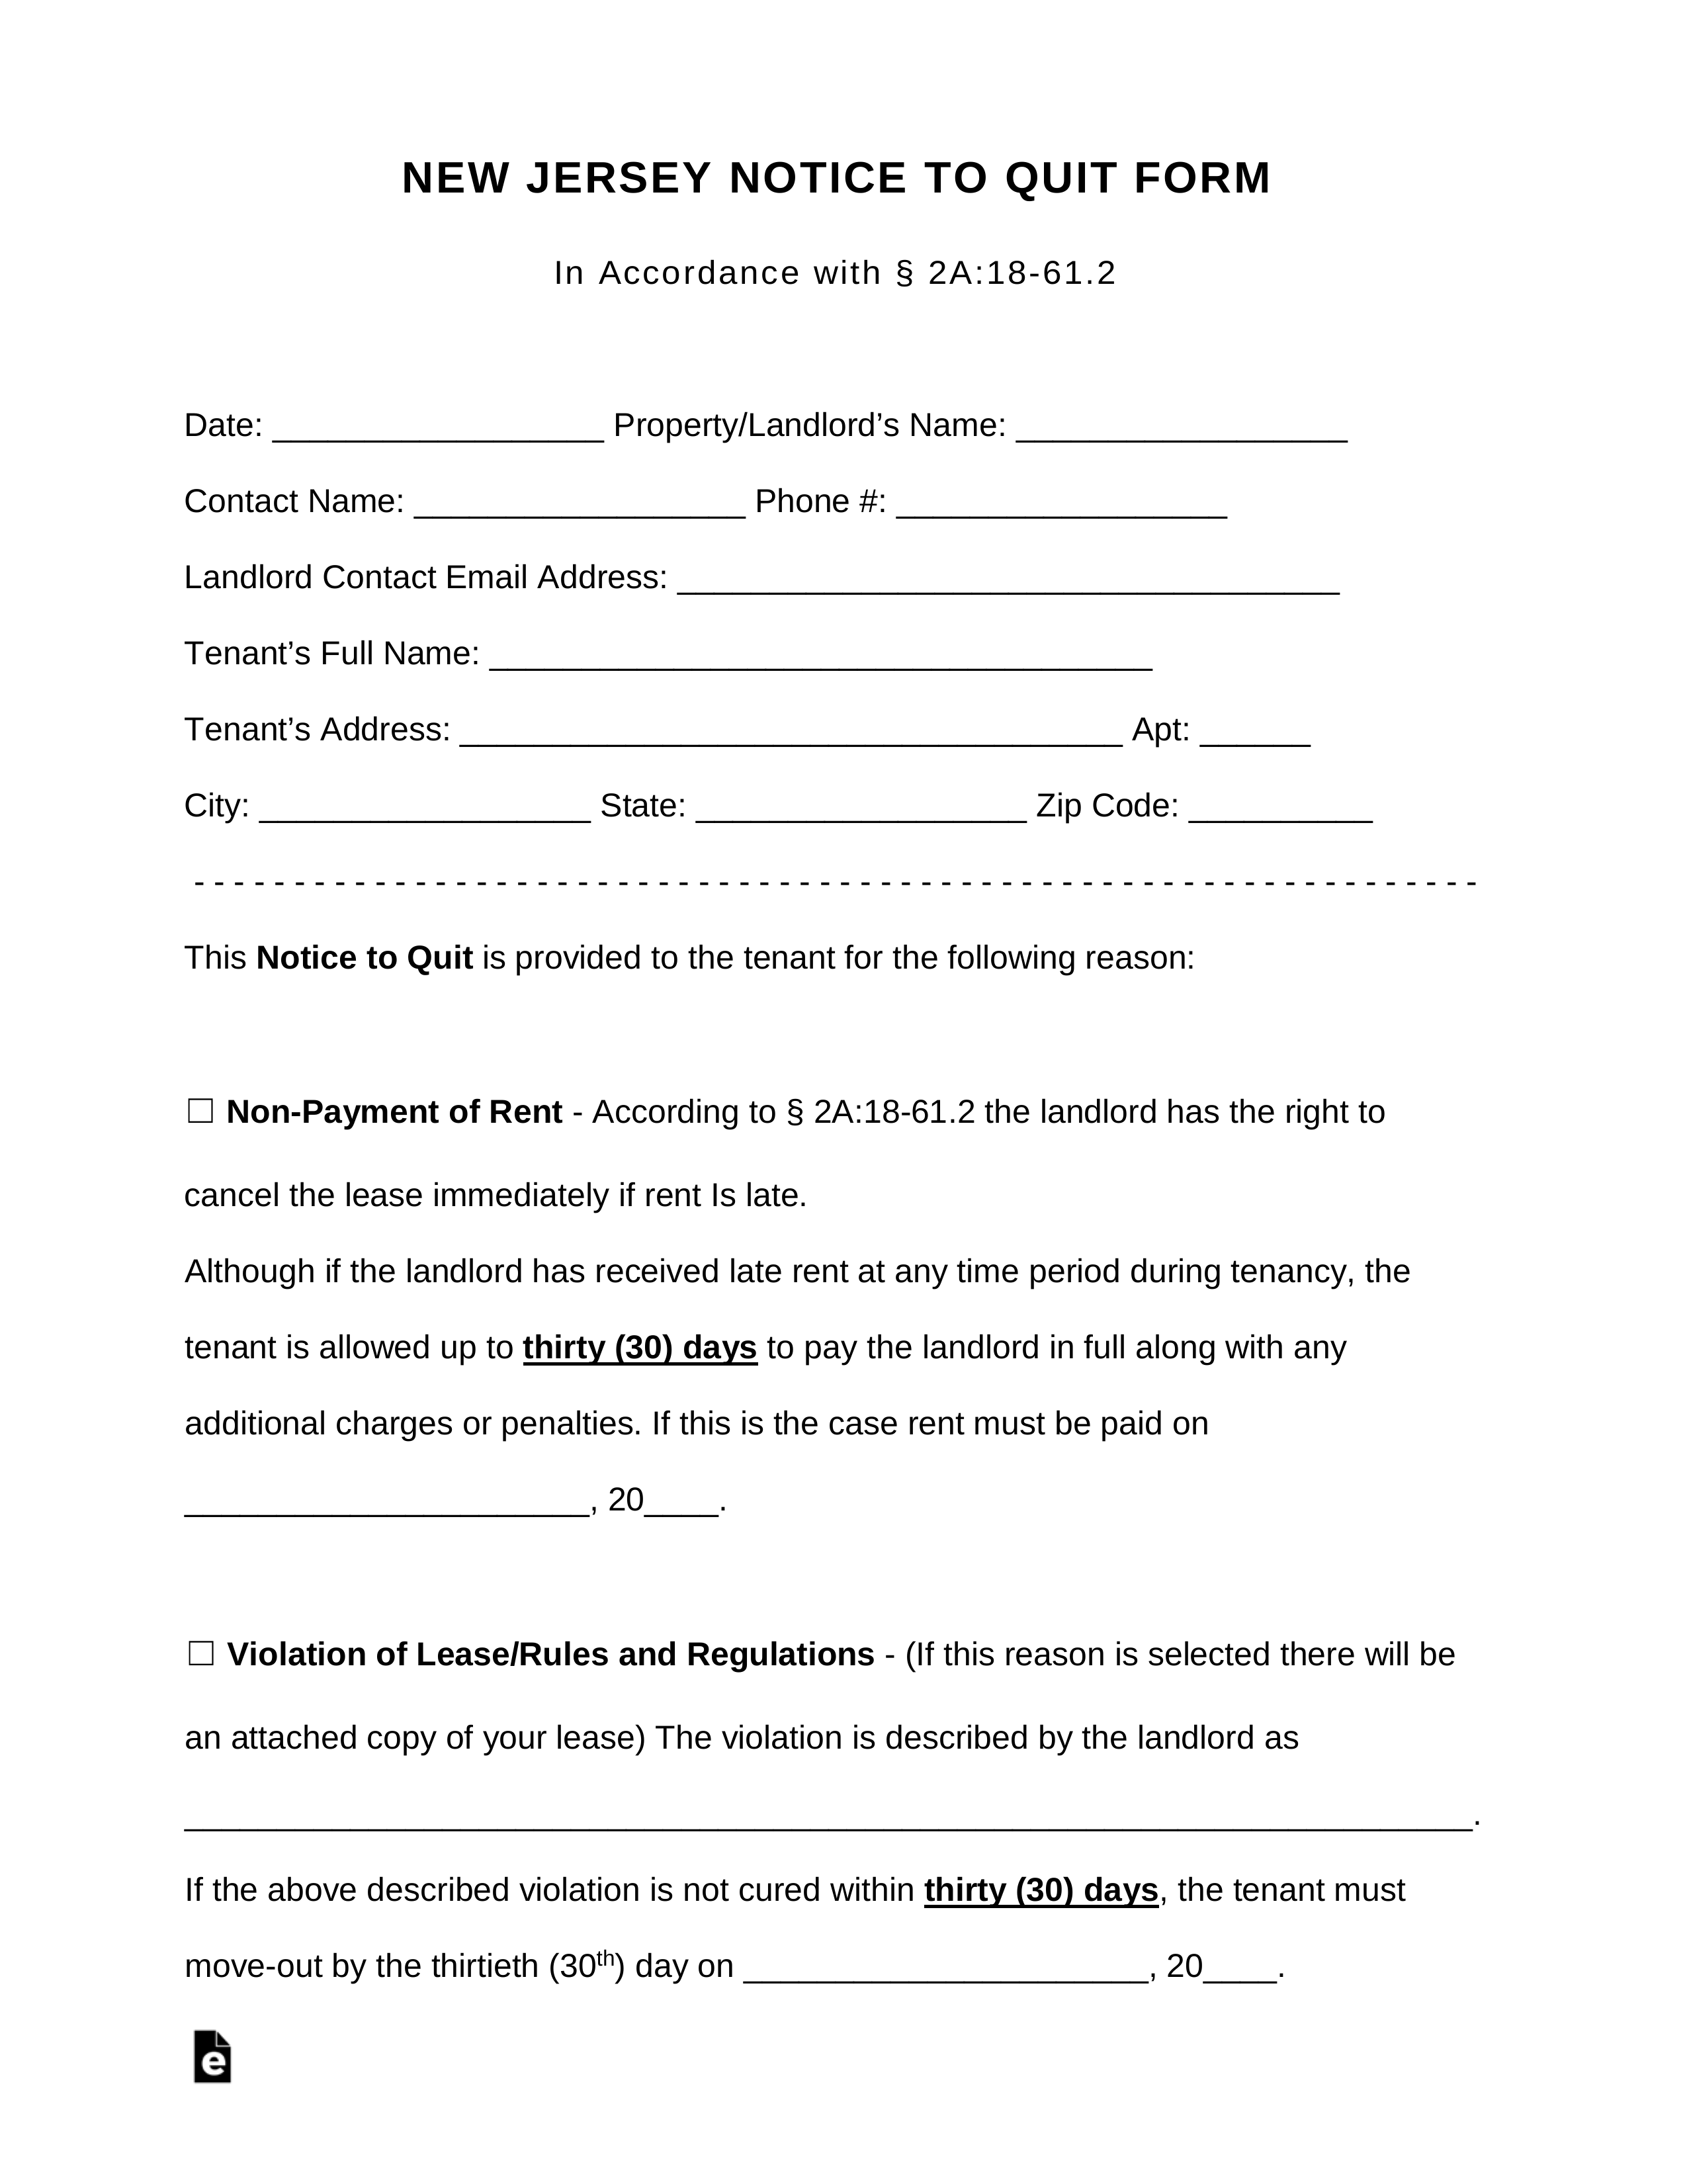 Free New Jersey Notice to Quit Form For All Violation Types PDF